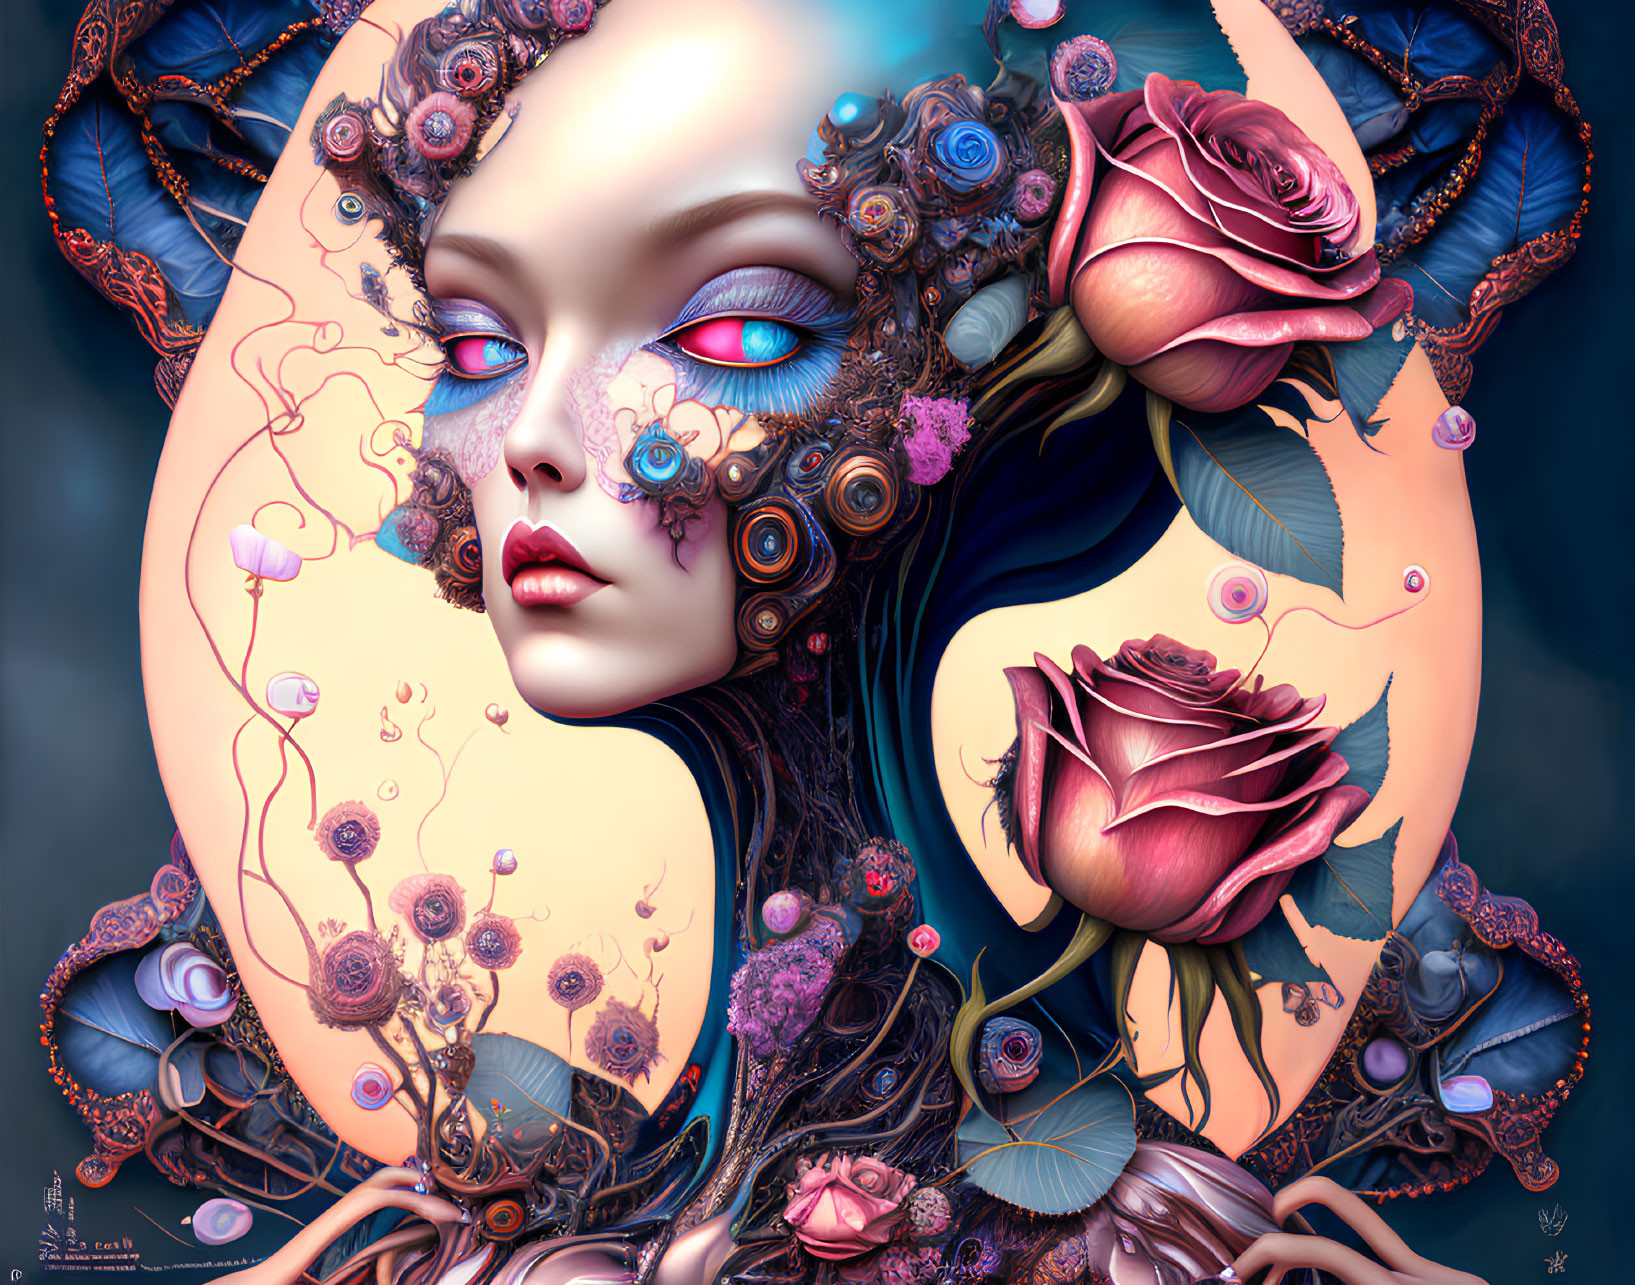 Surreal female portrait with rose motifs and mechanical elements